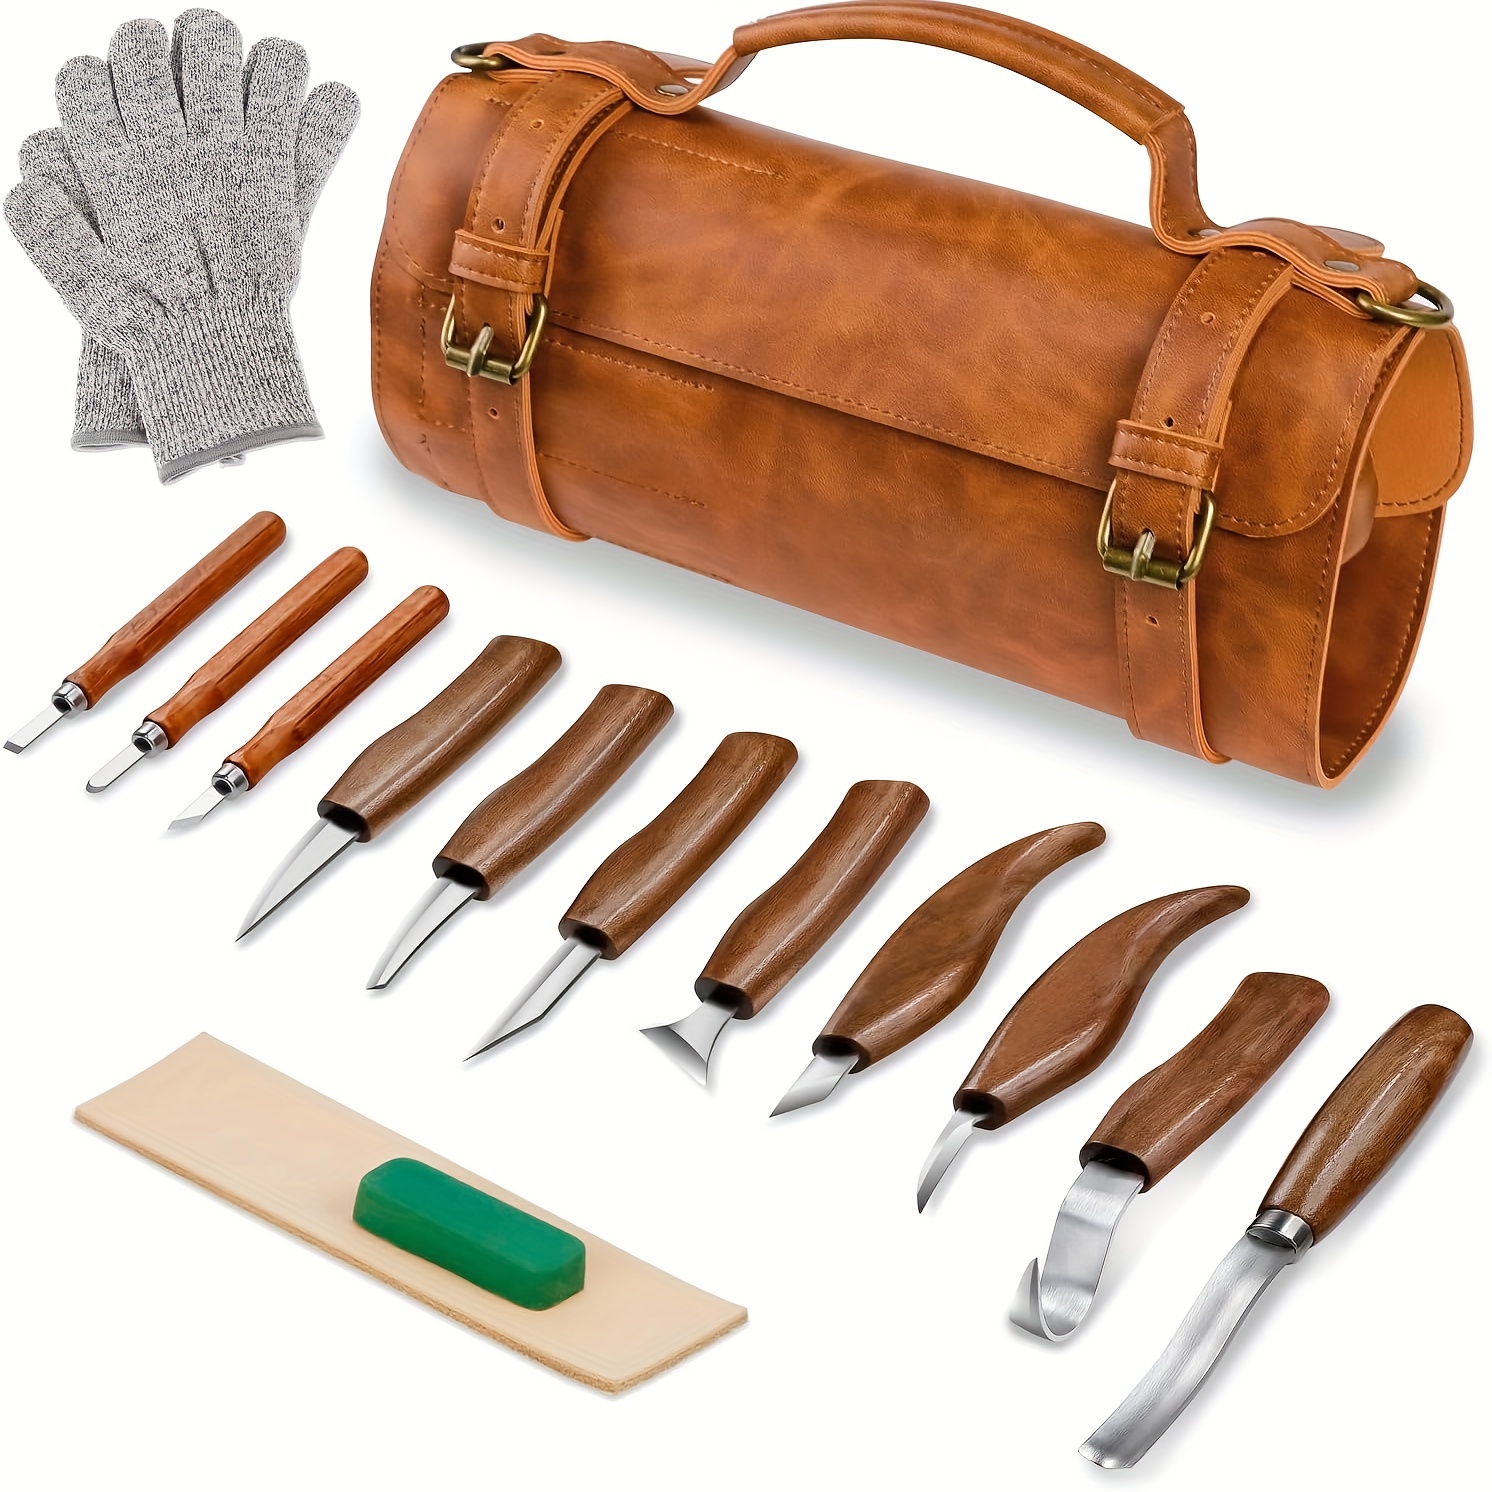 

Wood Carving Kit Deluxe-whittling Knife, Wood Carving Knife Set, Wood Whittling Kit For Beginners, Carving Knife Woodworking Wood Carving Tools Set With Large Leather Case